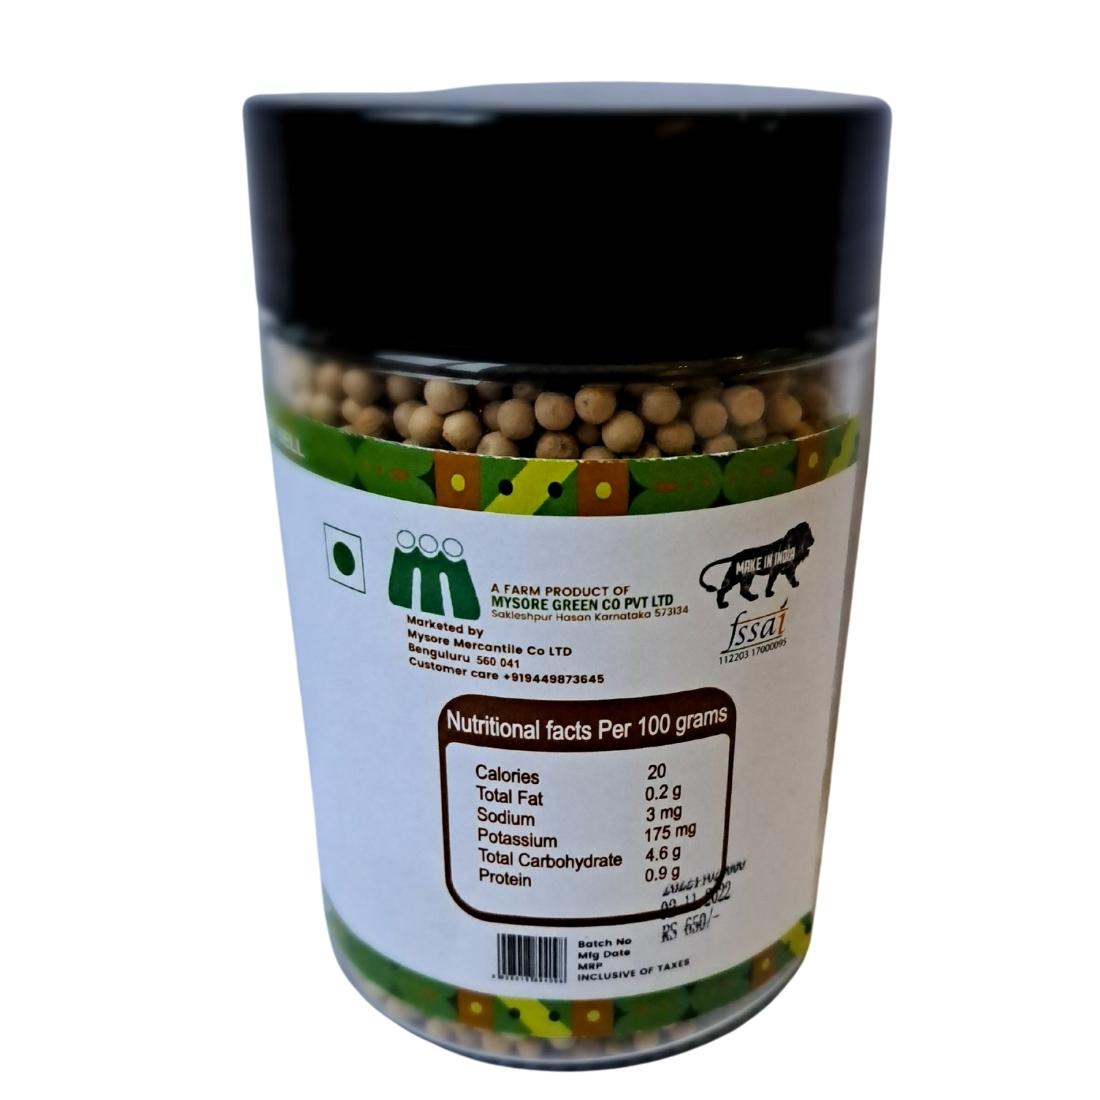 Product: Organic Express White Pepper